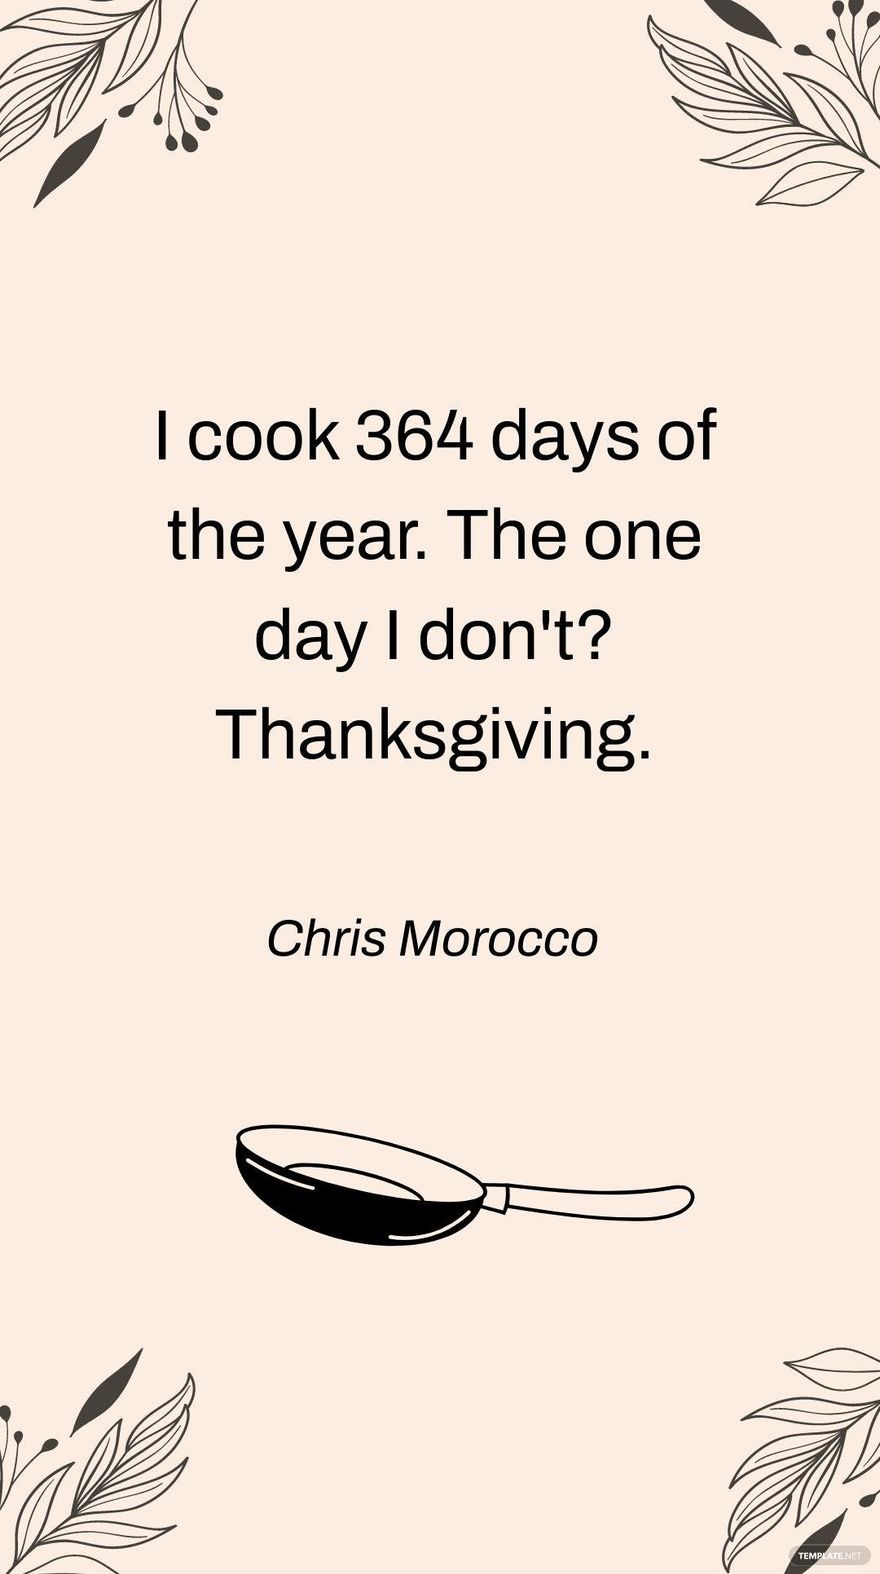 Free Chris Morocco - I cook 364 days of the year. The one day I don't? Thanksgiving. in JPG